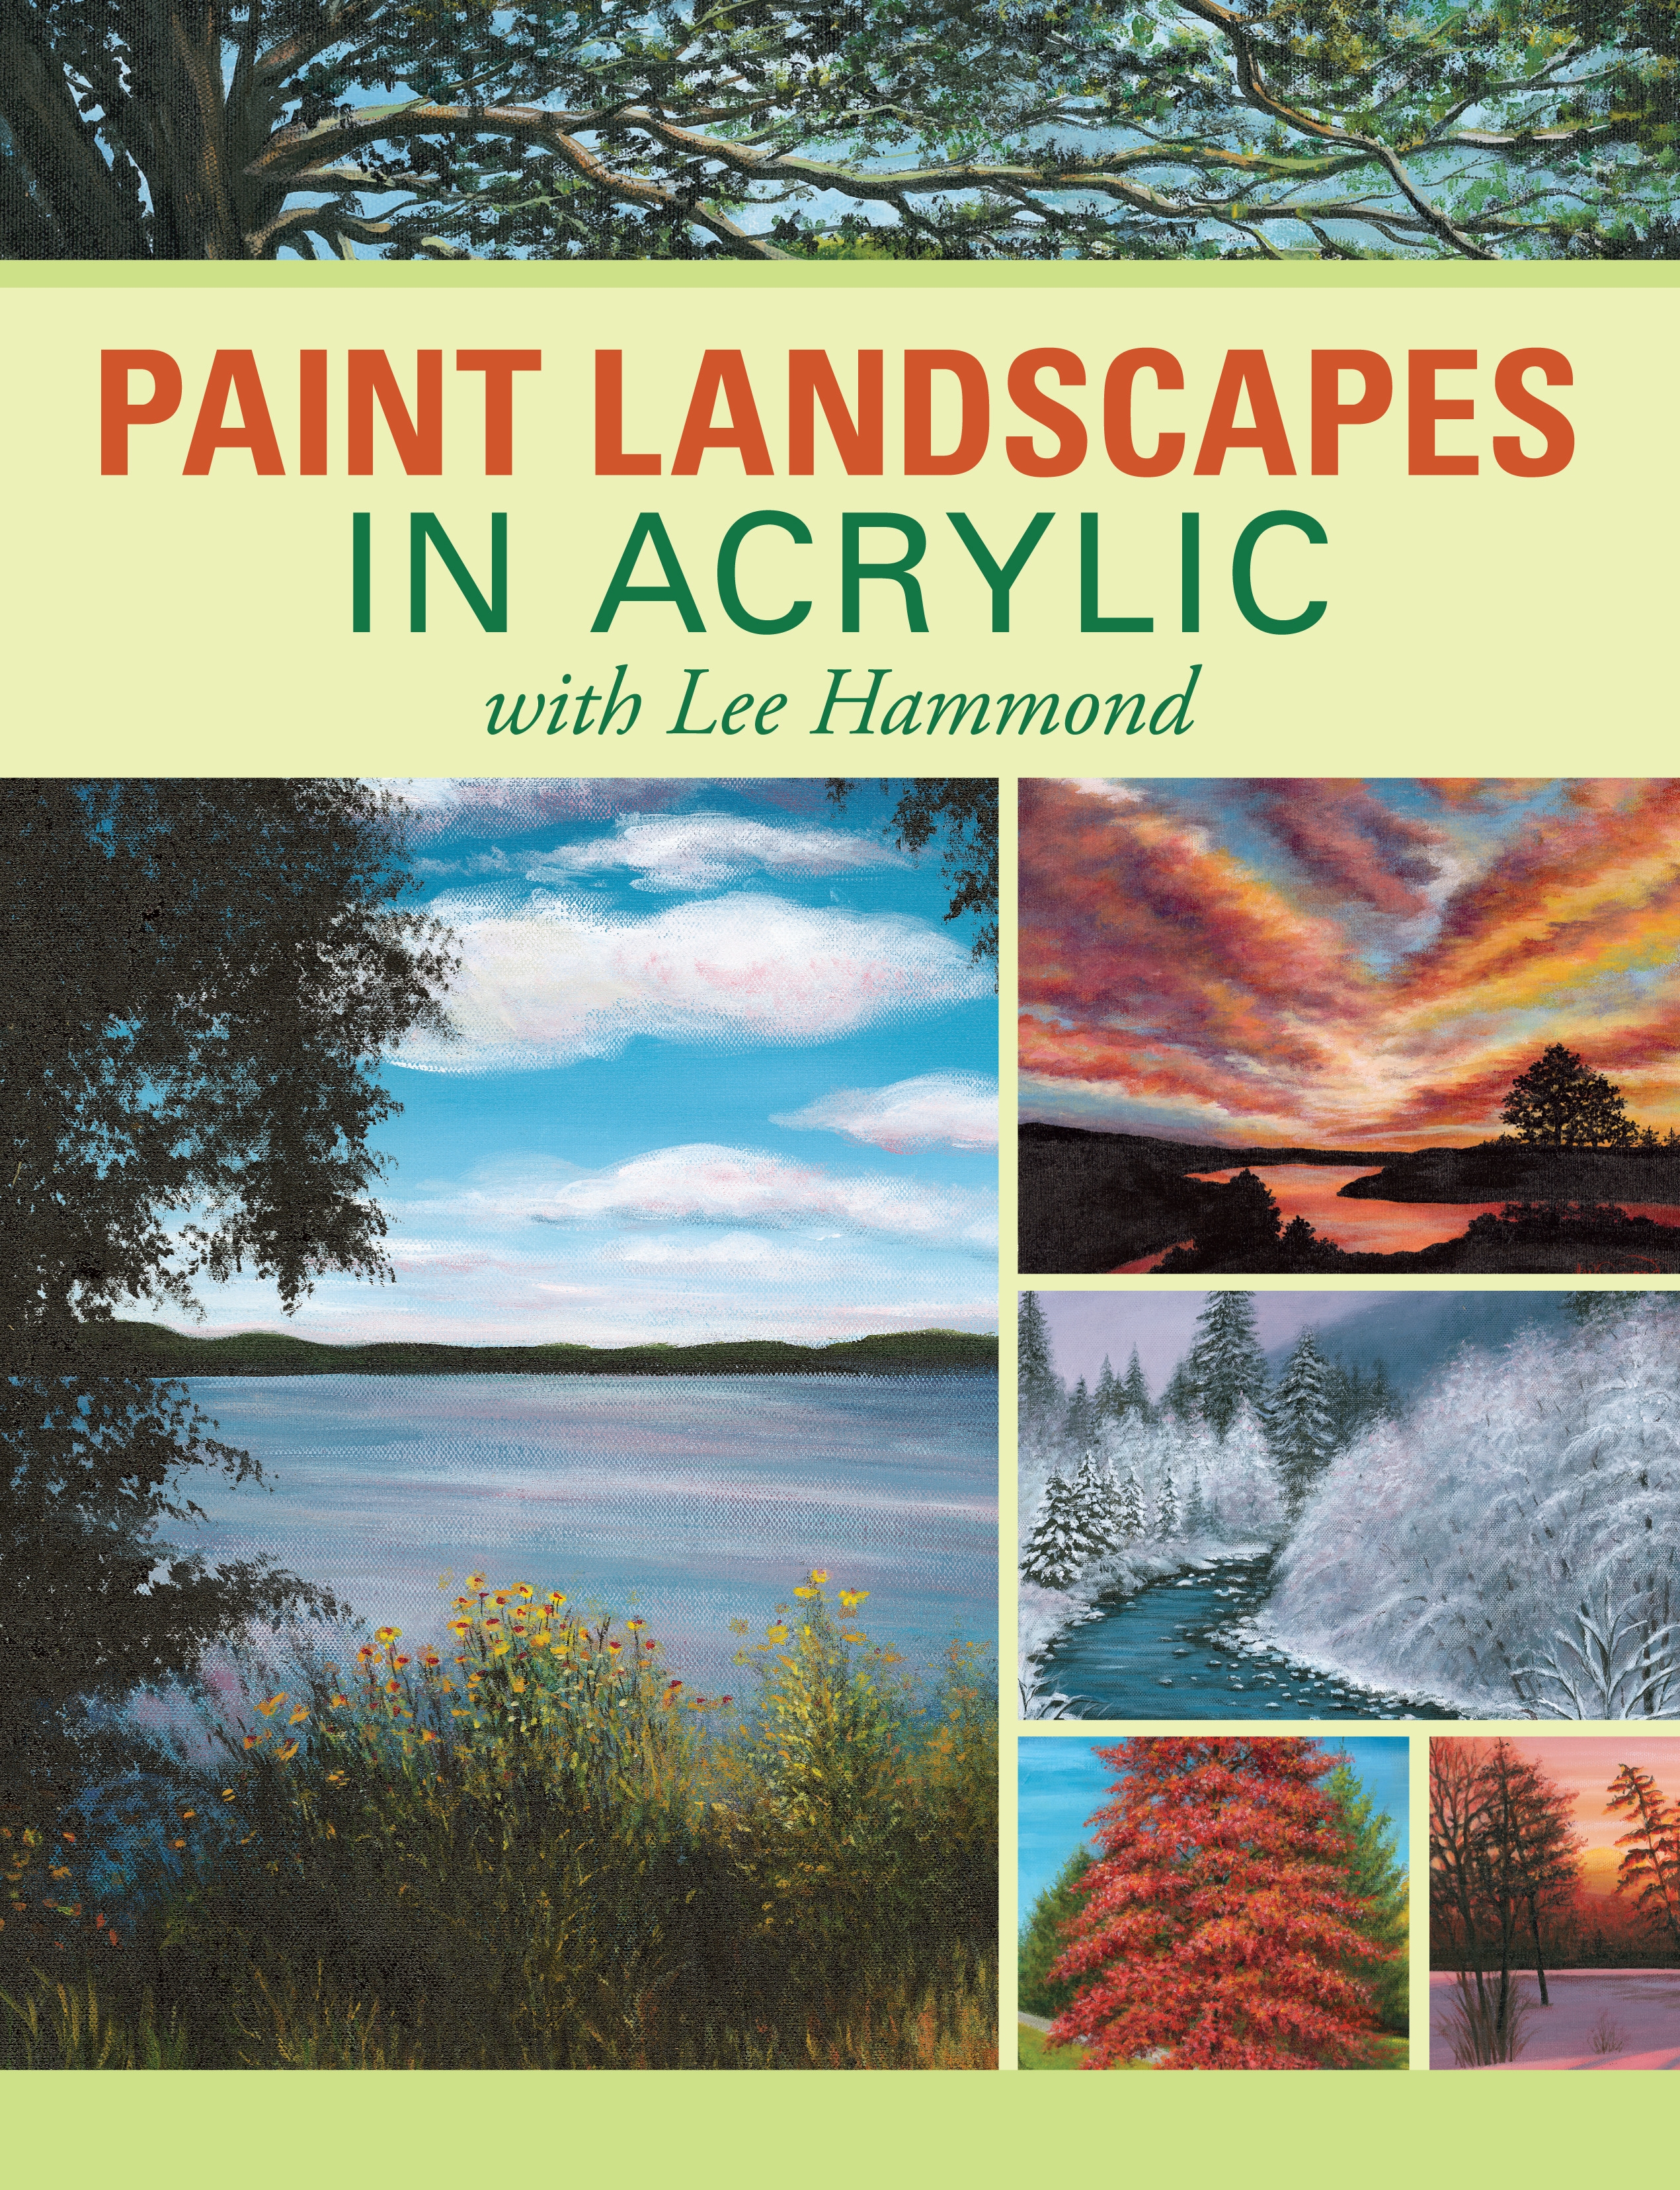 Paint Landscapes in Acrylic with Lee Hammond by Lee Hammond - Penguin Books  New Zealand